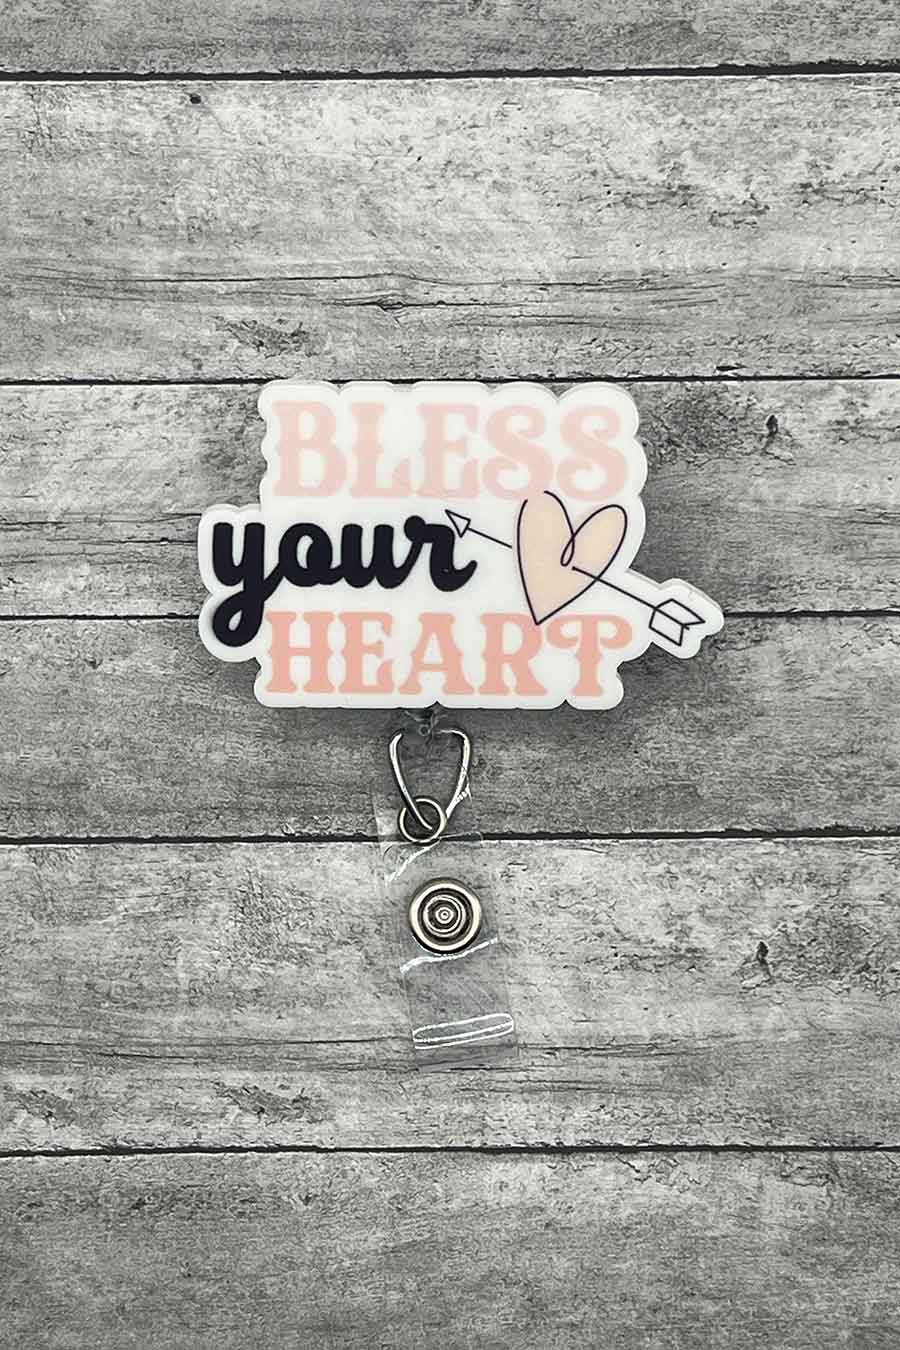 "Bless Your Heart Badge Reel featuring the phrase 'Bless Your Heart' with a heart accent in elegant typography."